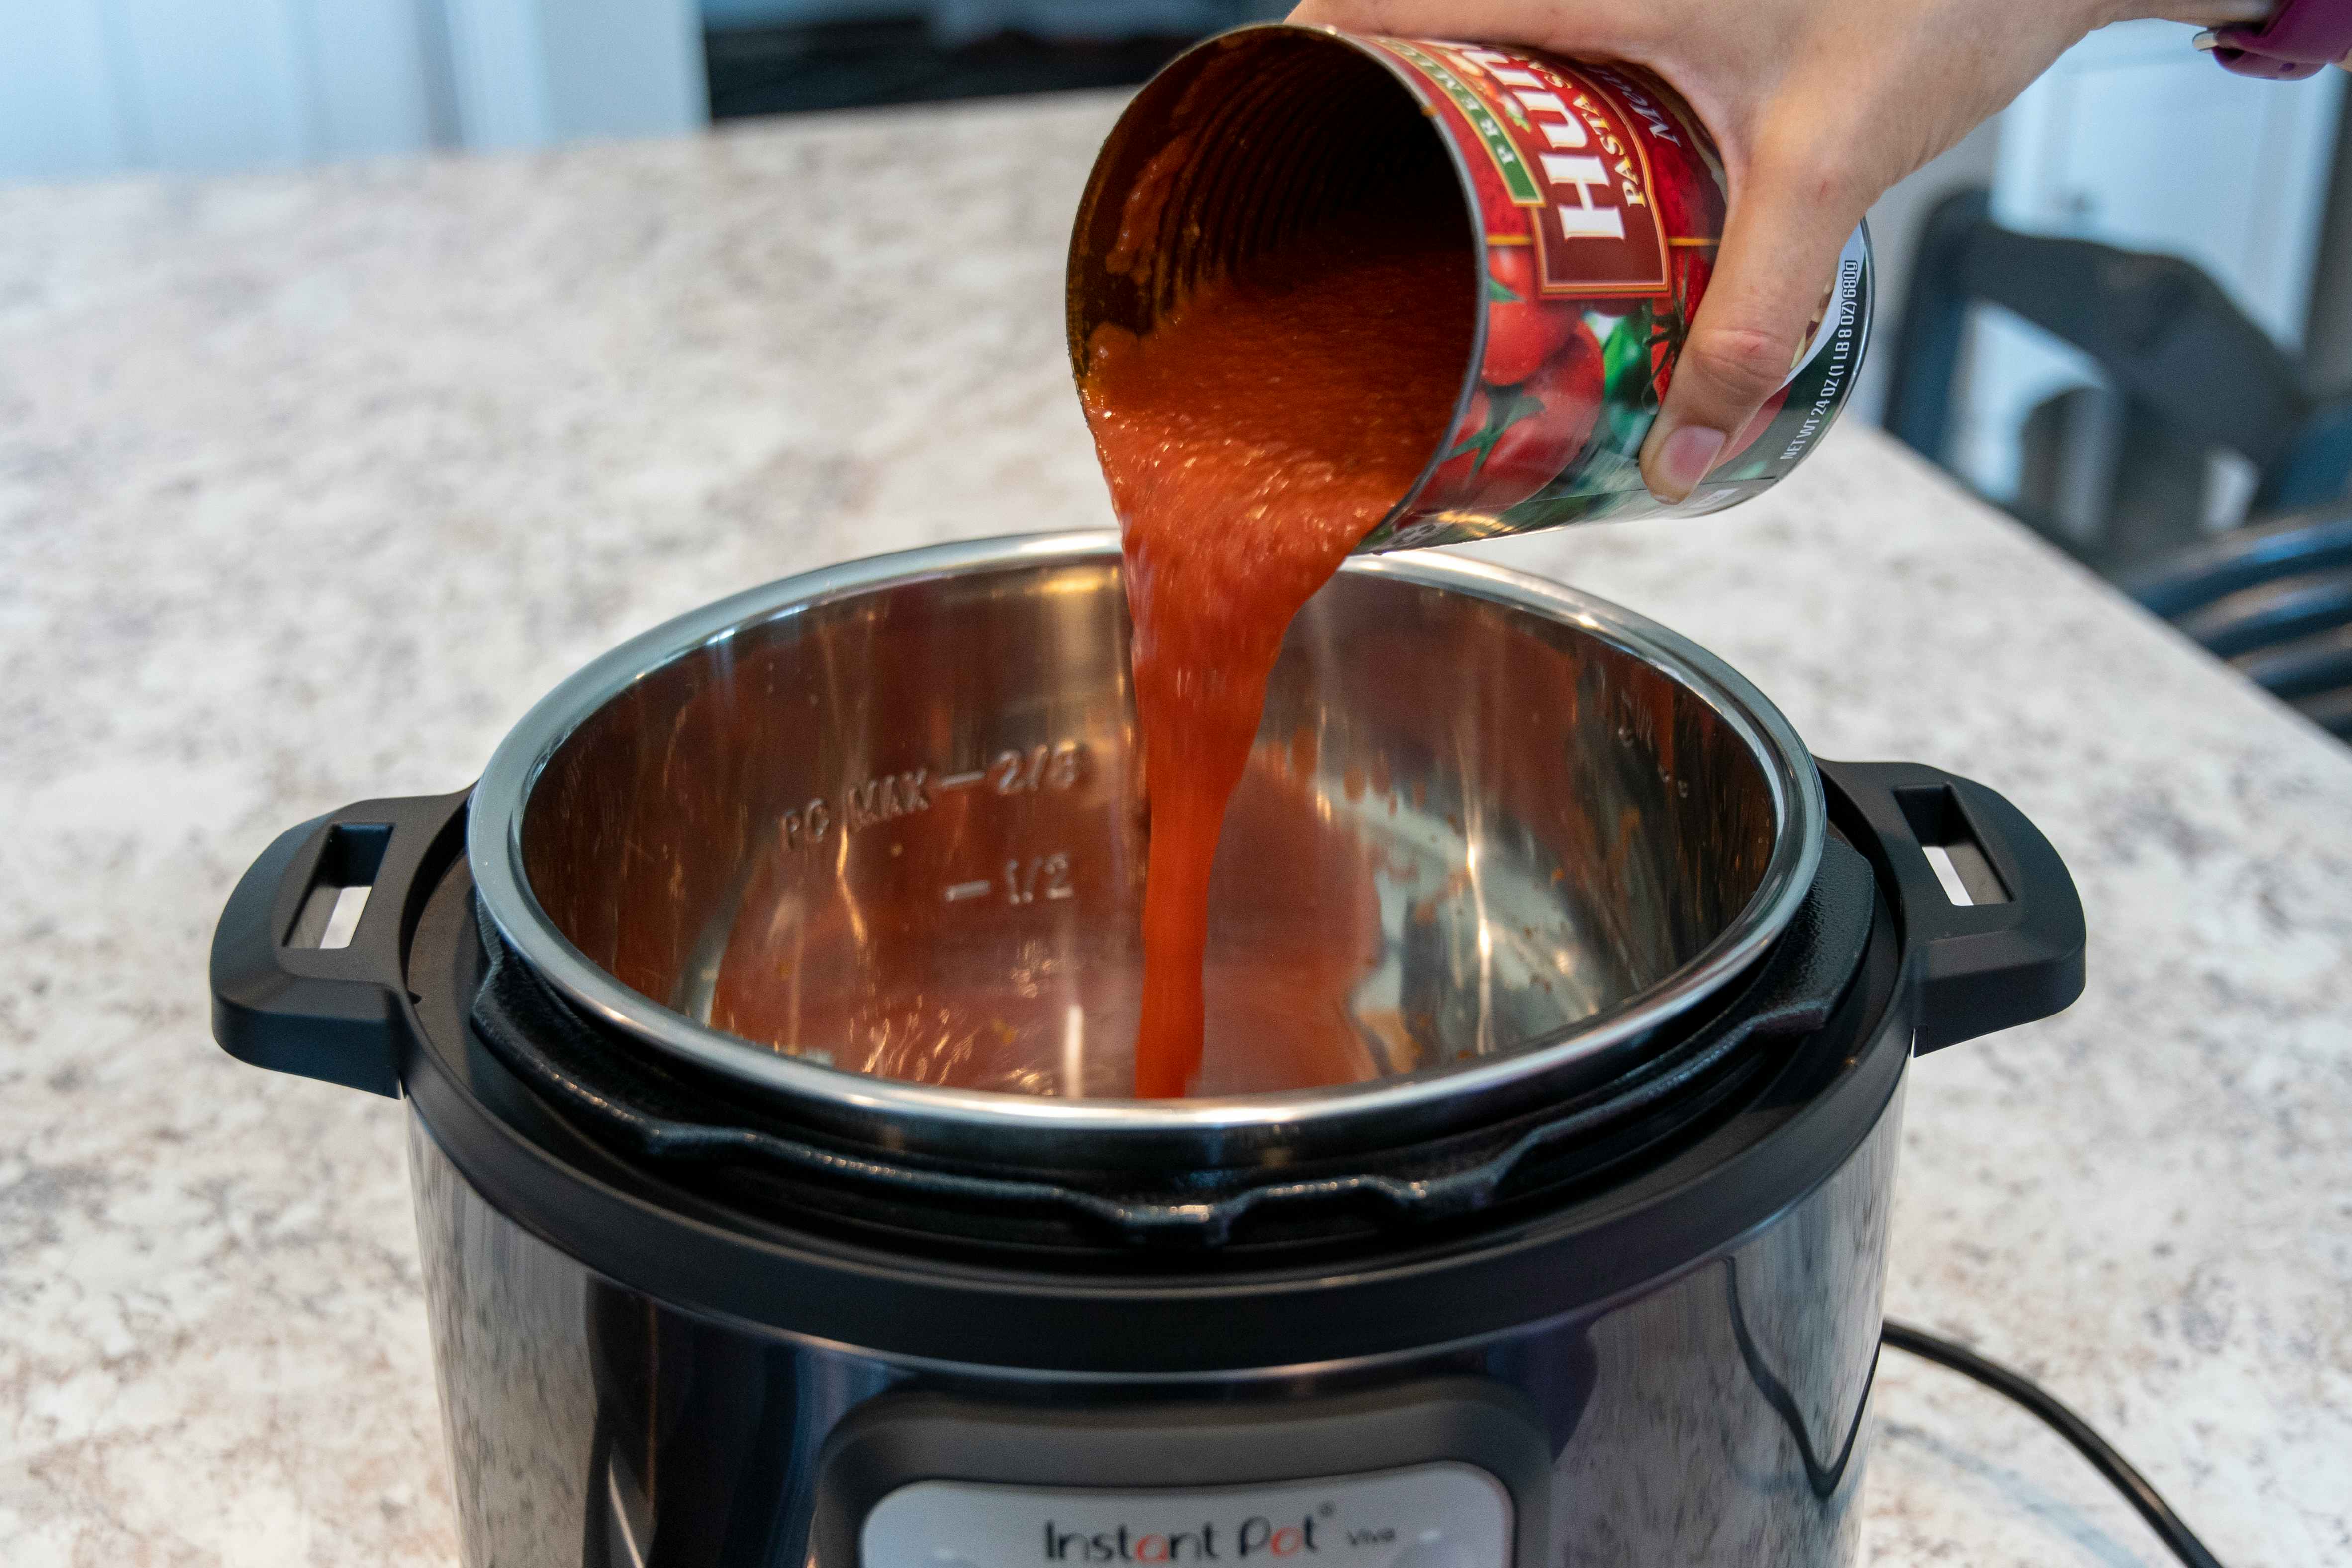 https://prod-cdn-thekrazycouponlady.imgix.net/wp-content/uploads/2018/04/instant-pot-mistakes-wrong-liquid-tomatoe-37-1628200074-1628200075.jpg?auto=format&fit=fill&q=25